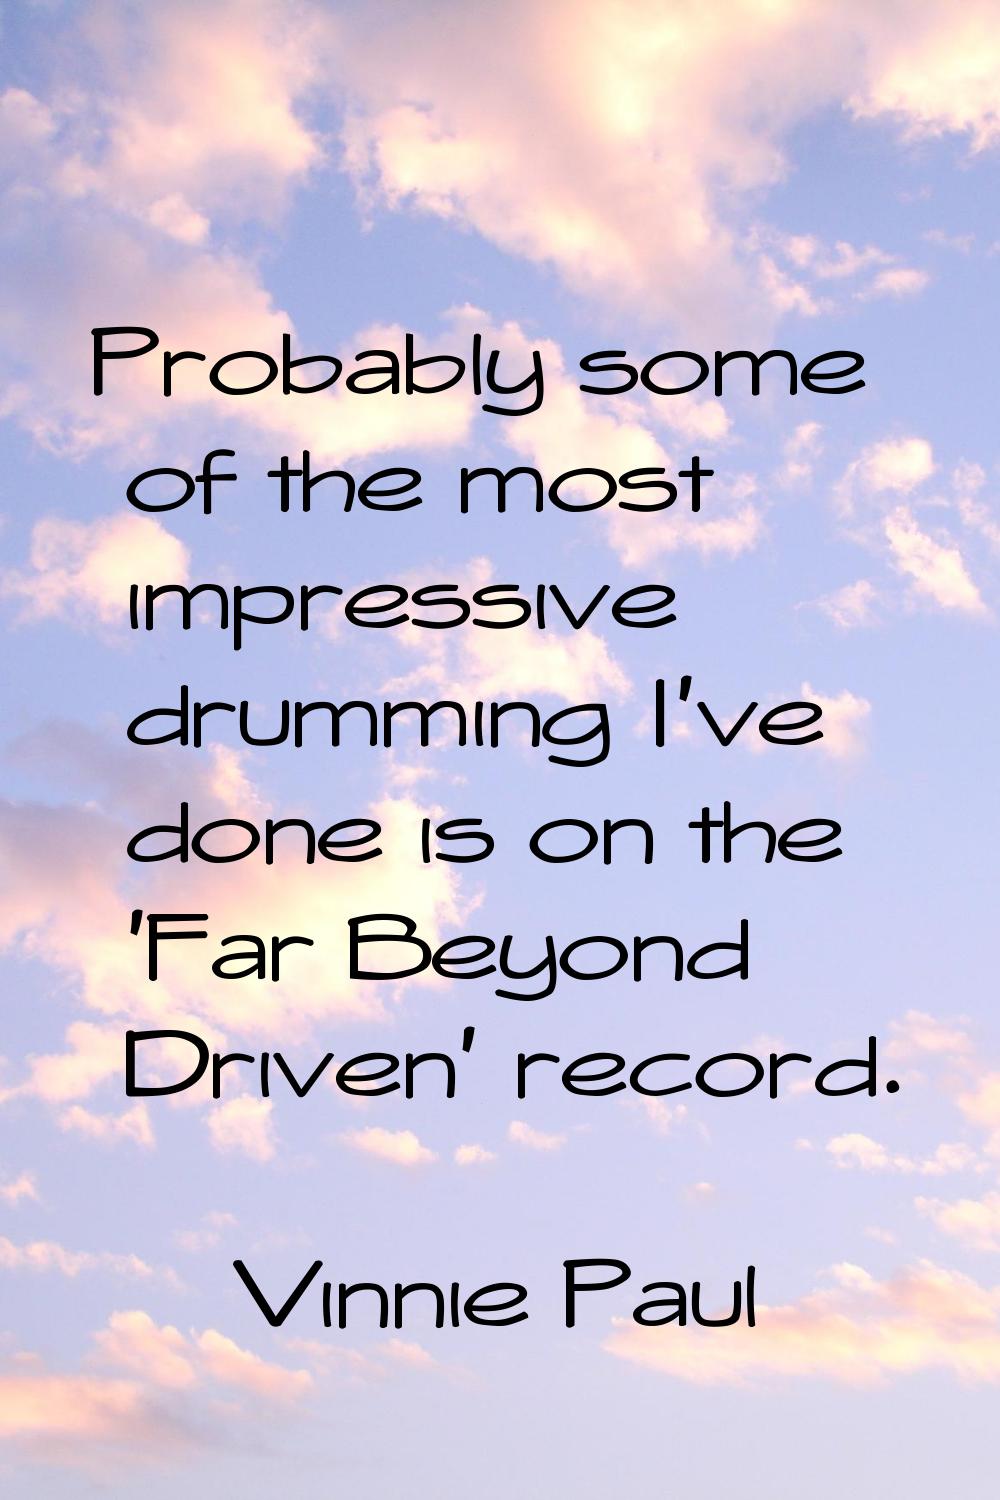 Probably some of the most impressive drumming I've done is on the 'Far Beyond Driven' record.